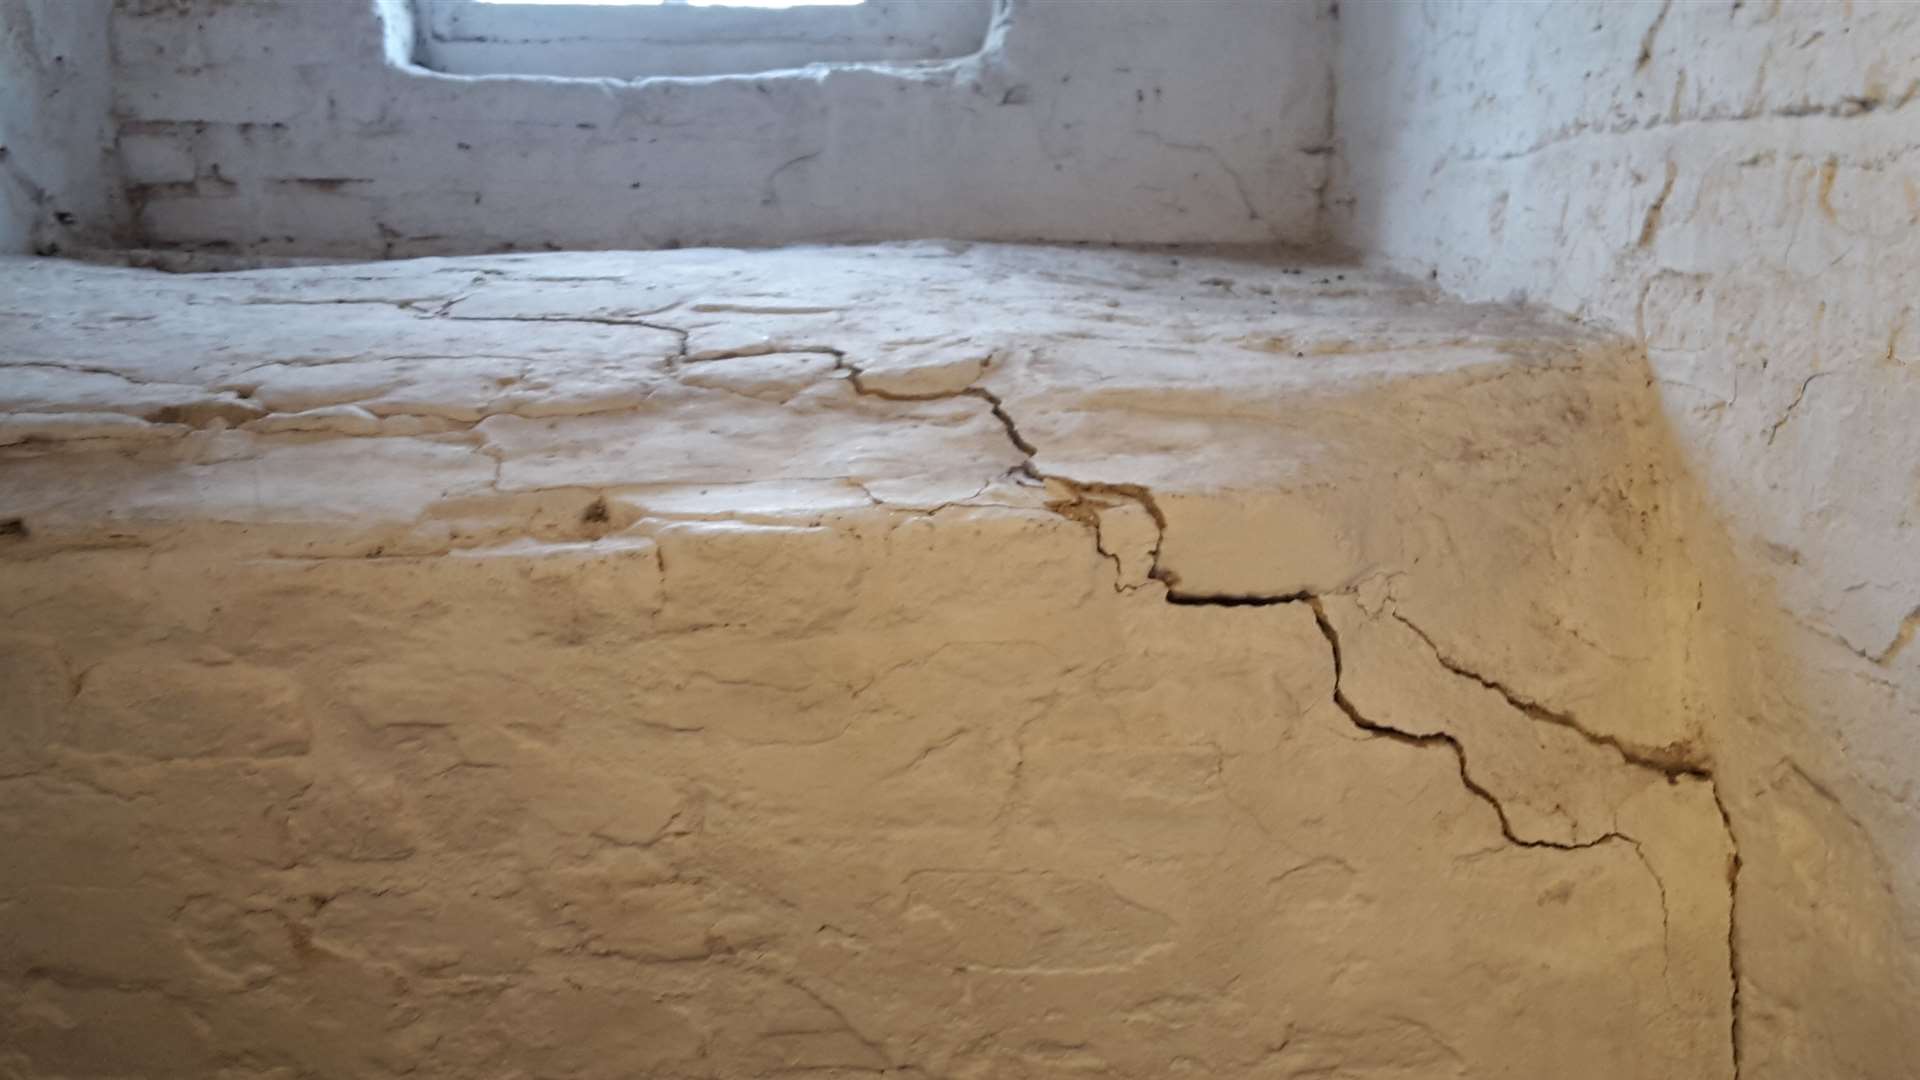 Subsidence had caused large cracks to form. Picture: National Trust